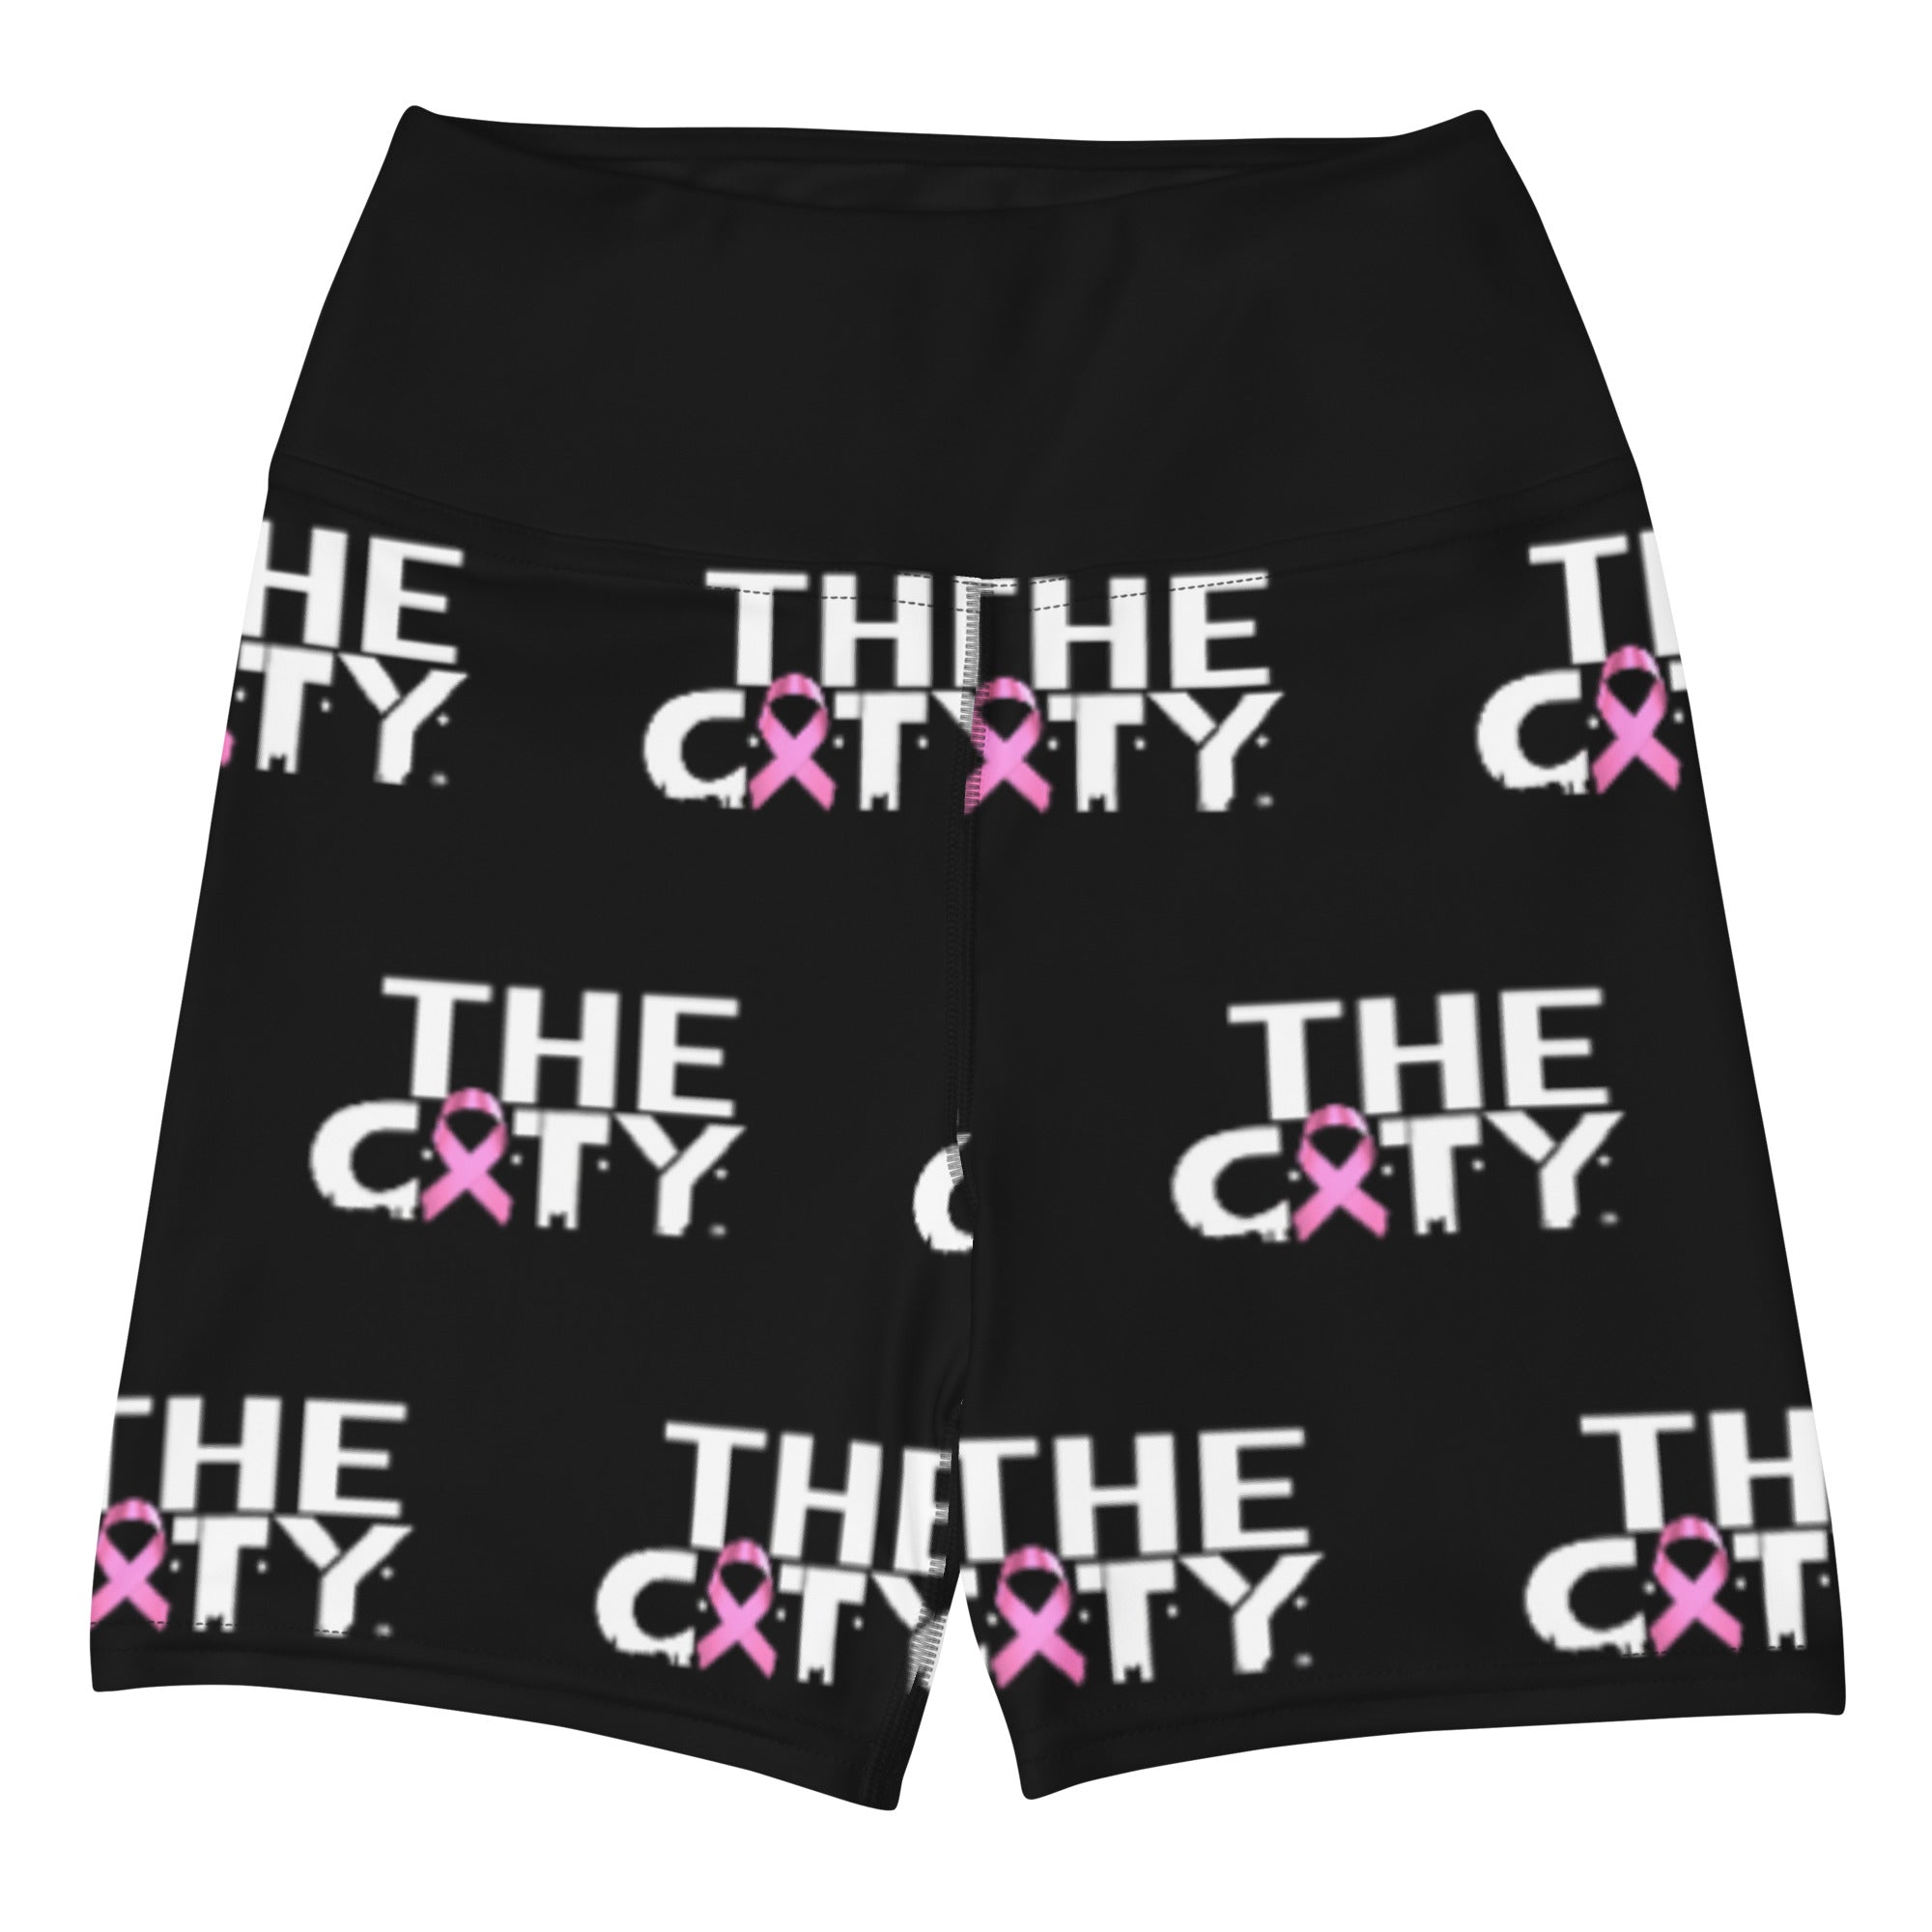 THE C.I.T.Y. Breast Cancer Awareness BLK Yoga Shorts